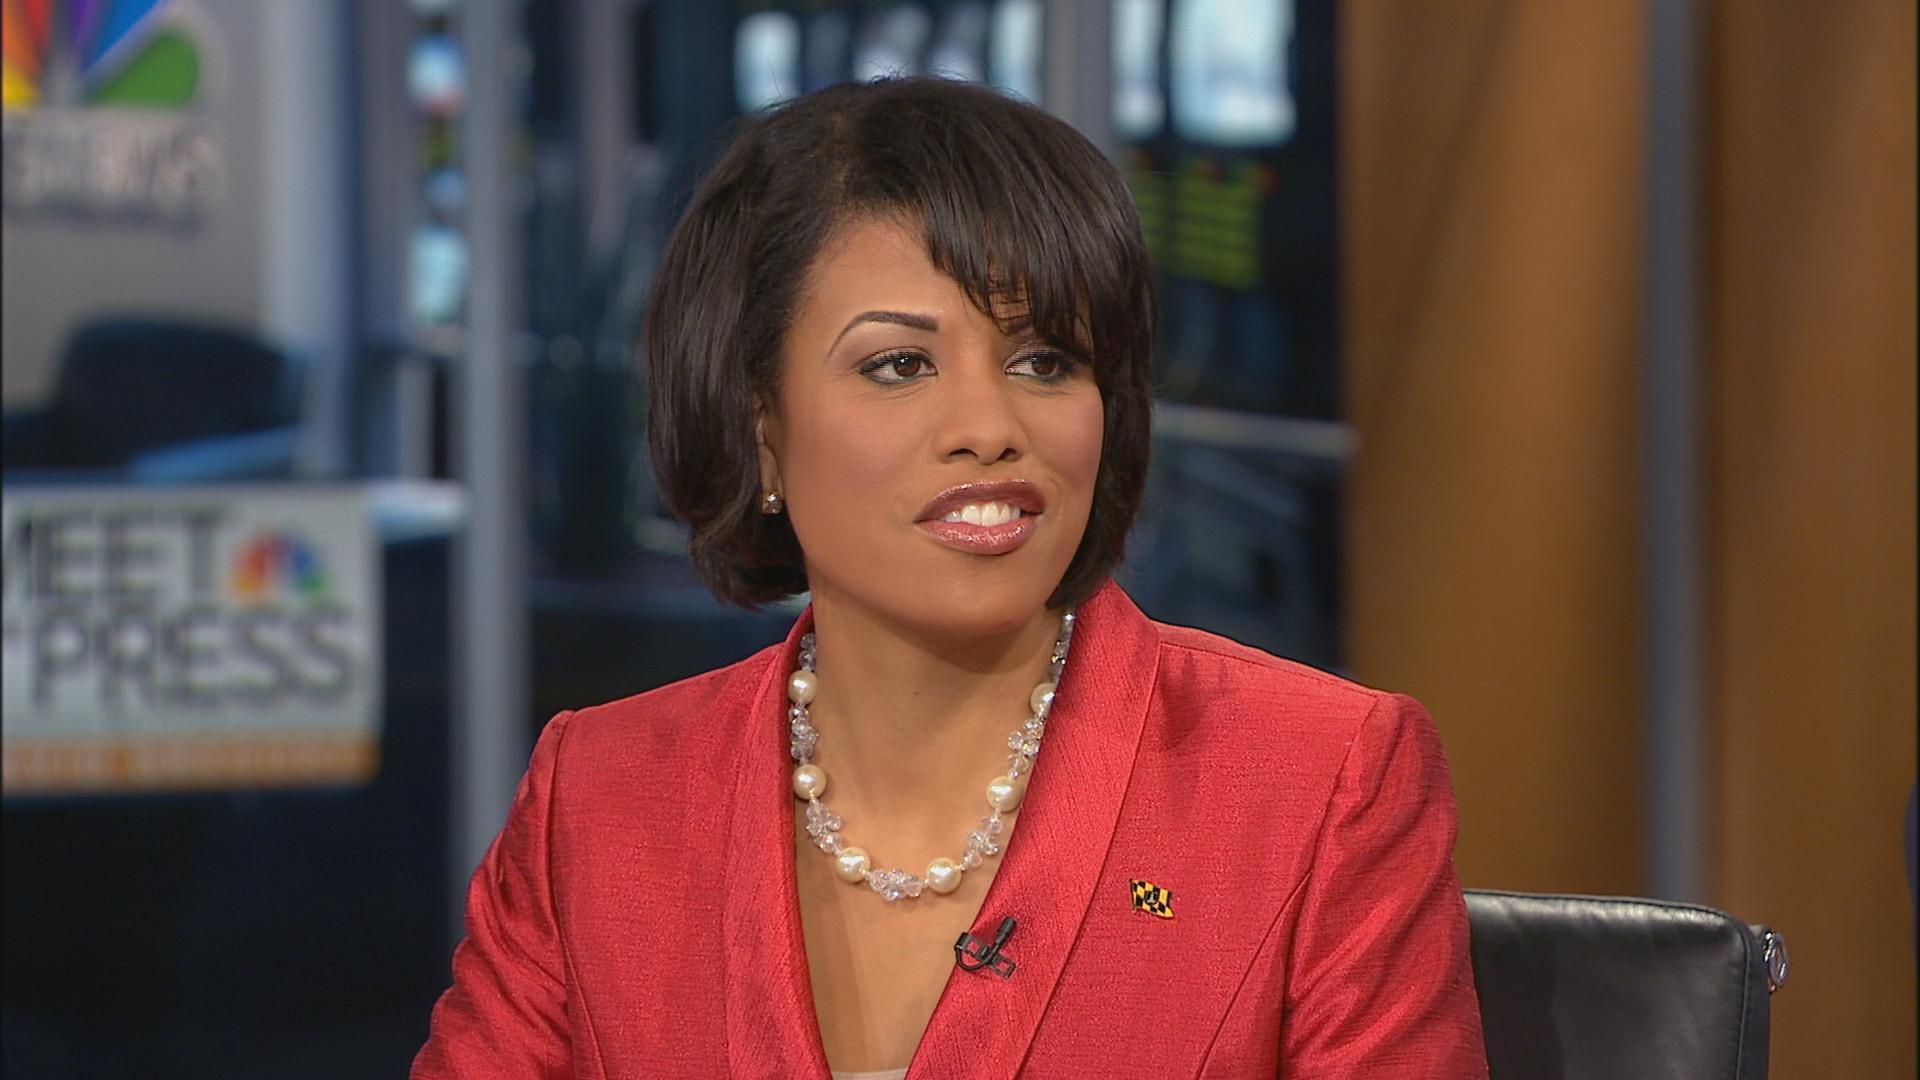 Stephanie Rawlings-Blake defends Obamacare on 'Meet the Press' - Baltimore Sun1920 x 1080